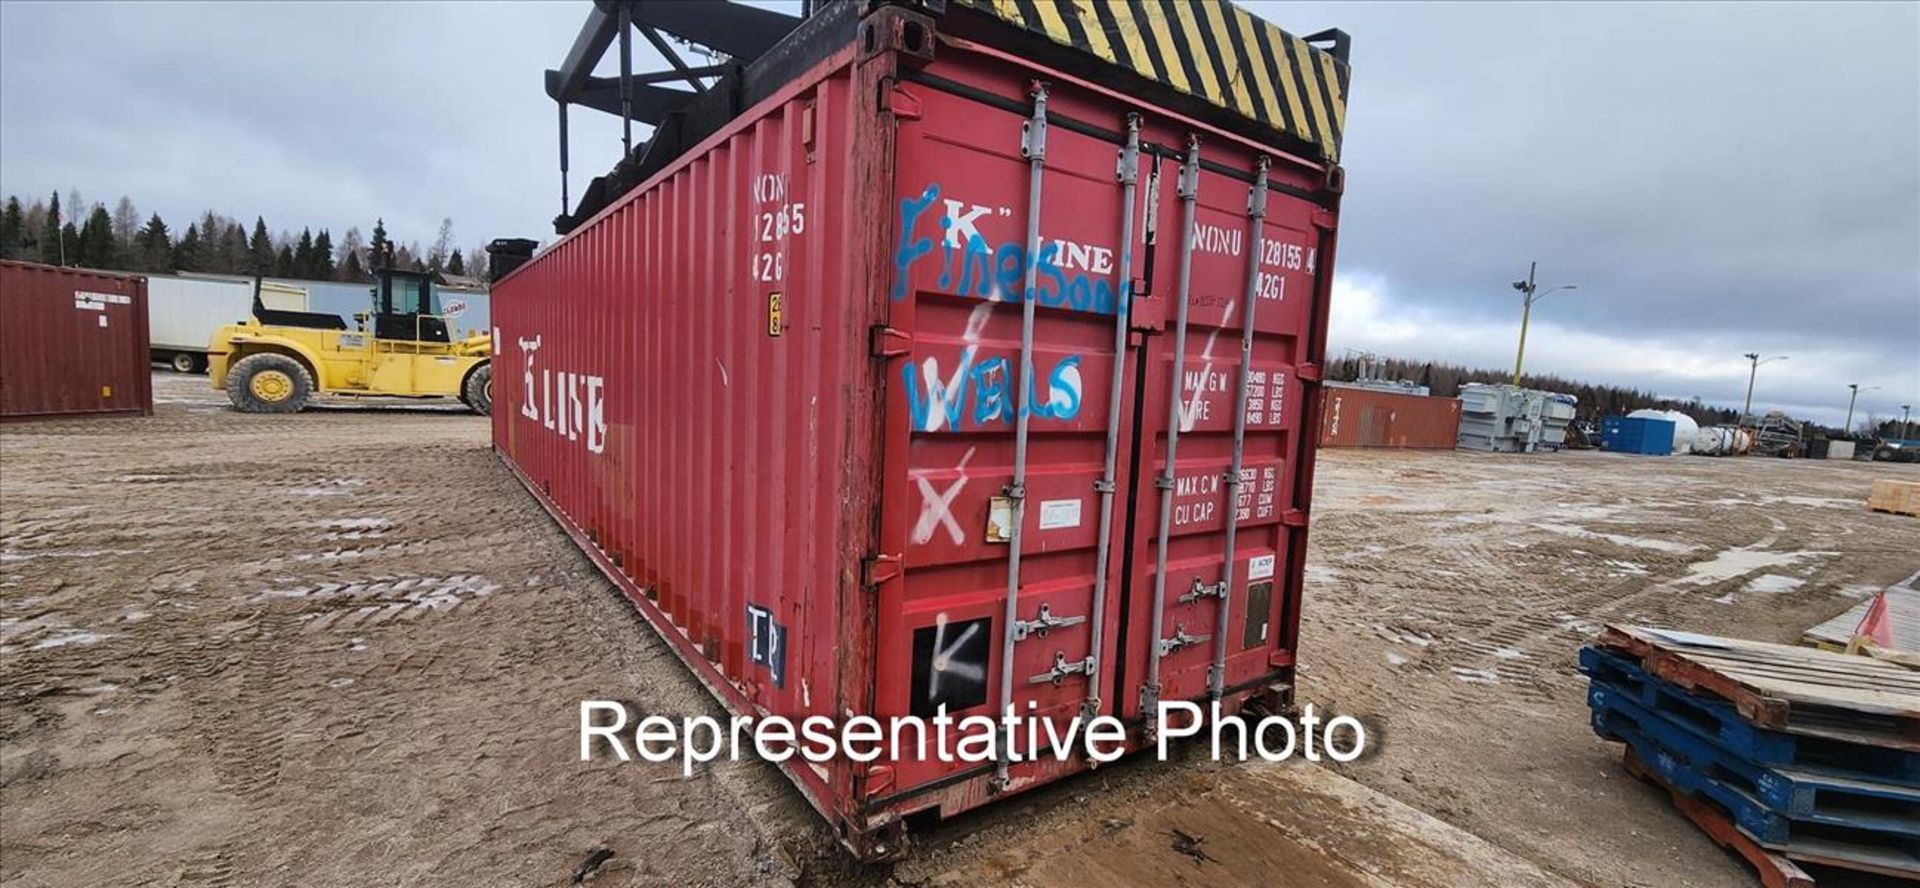 sea container, 40 ft. (delayed removal date applies) (Asset Location: Hallnor Yard) {Day 1} [TAG - Image 2 of 2